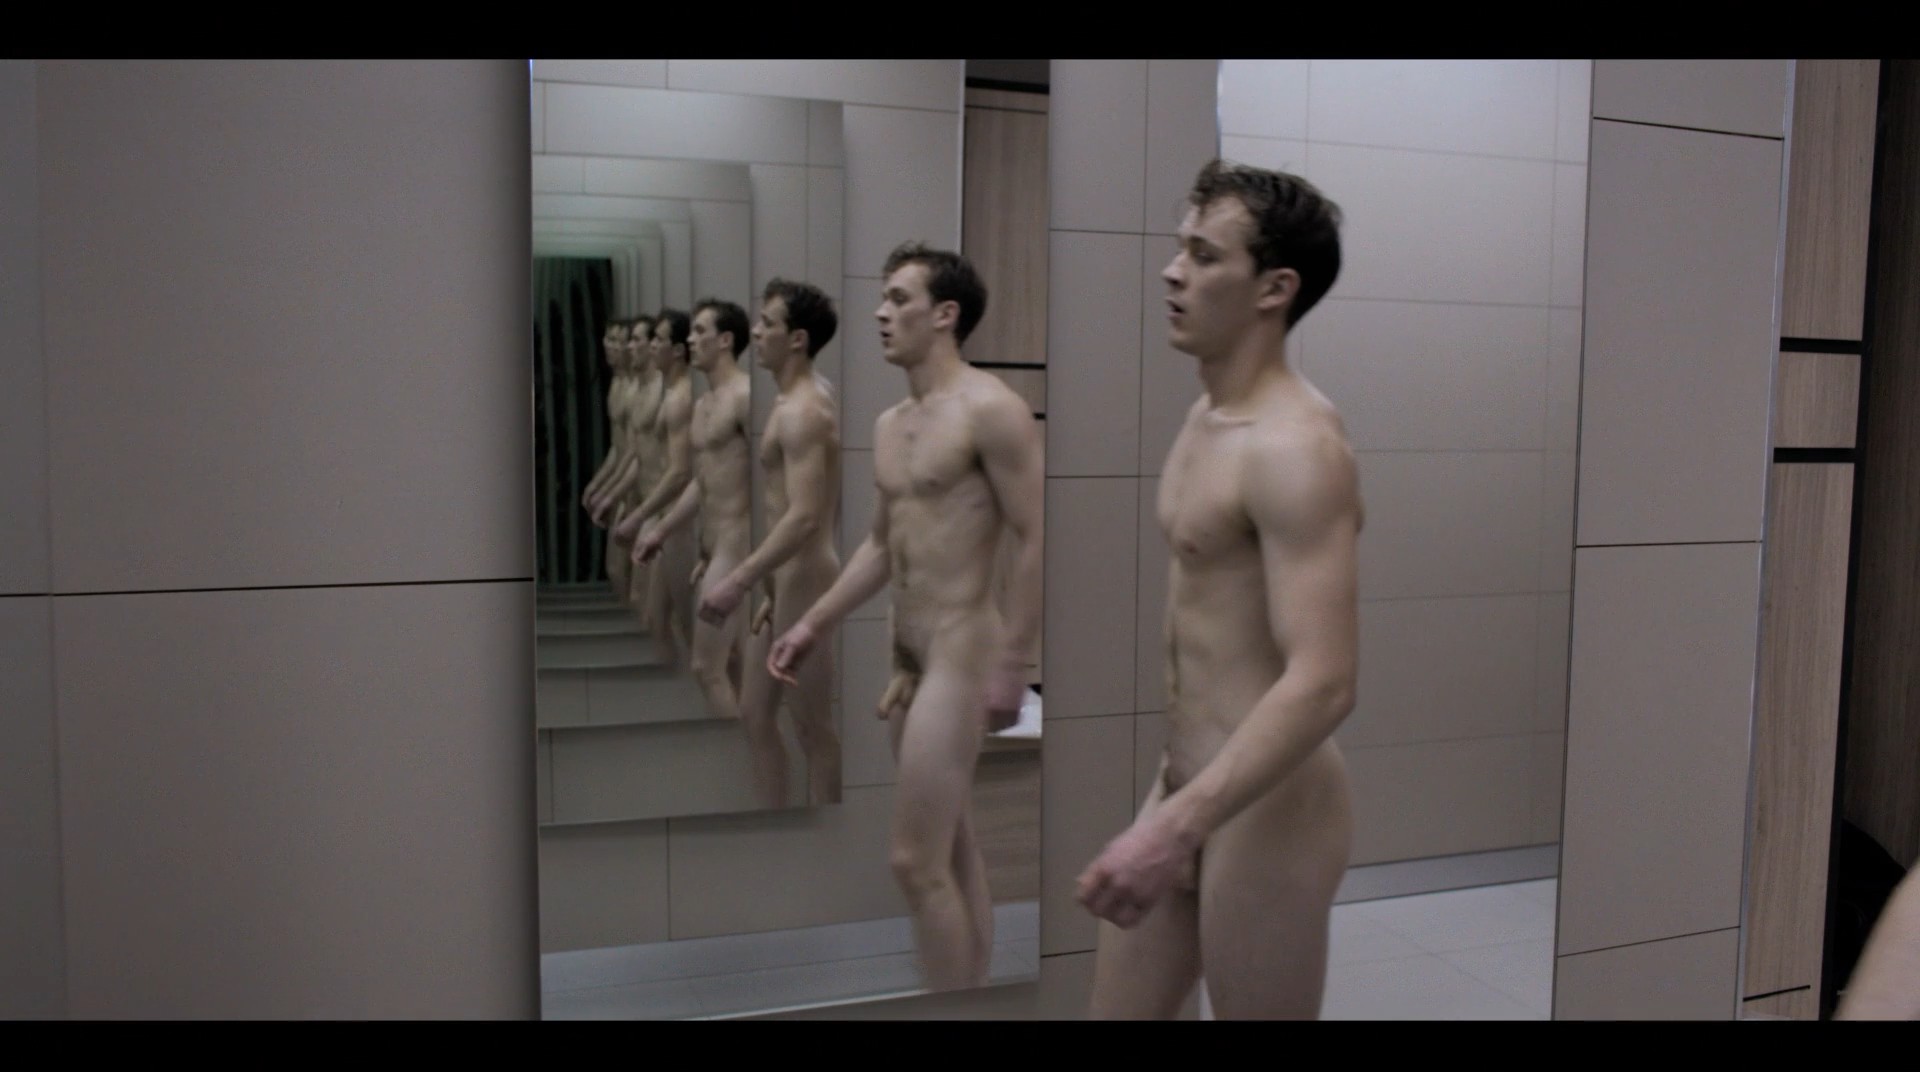 OMG he’s naked: Actor Harry Lawtey in HBO’s 'Industry' .